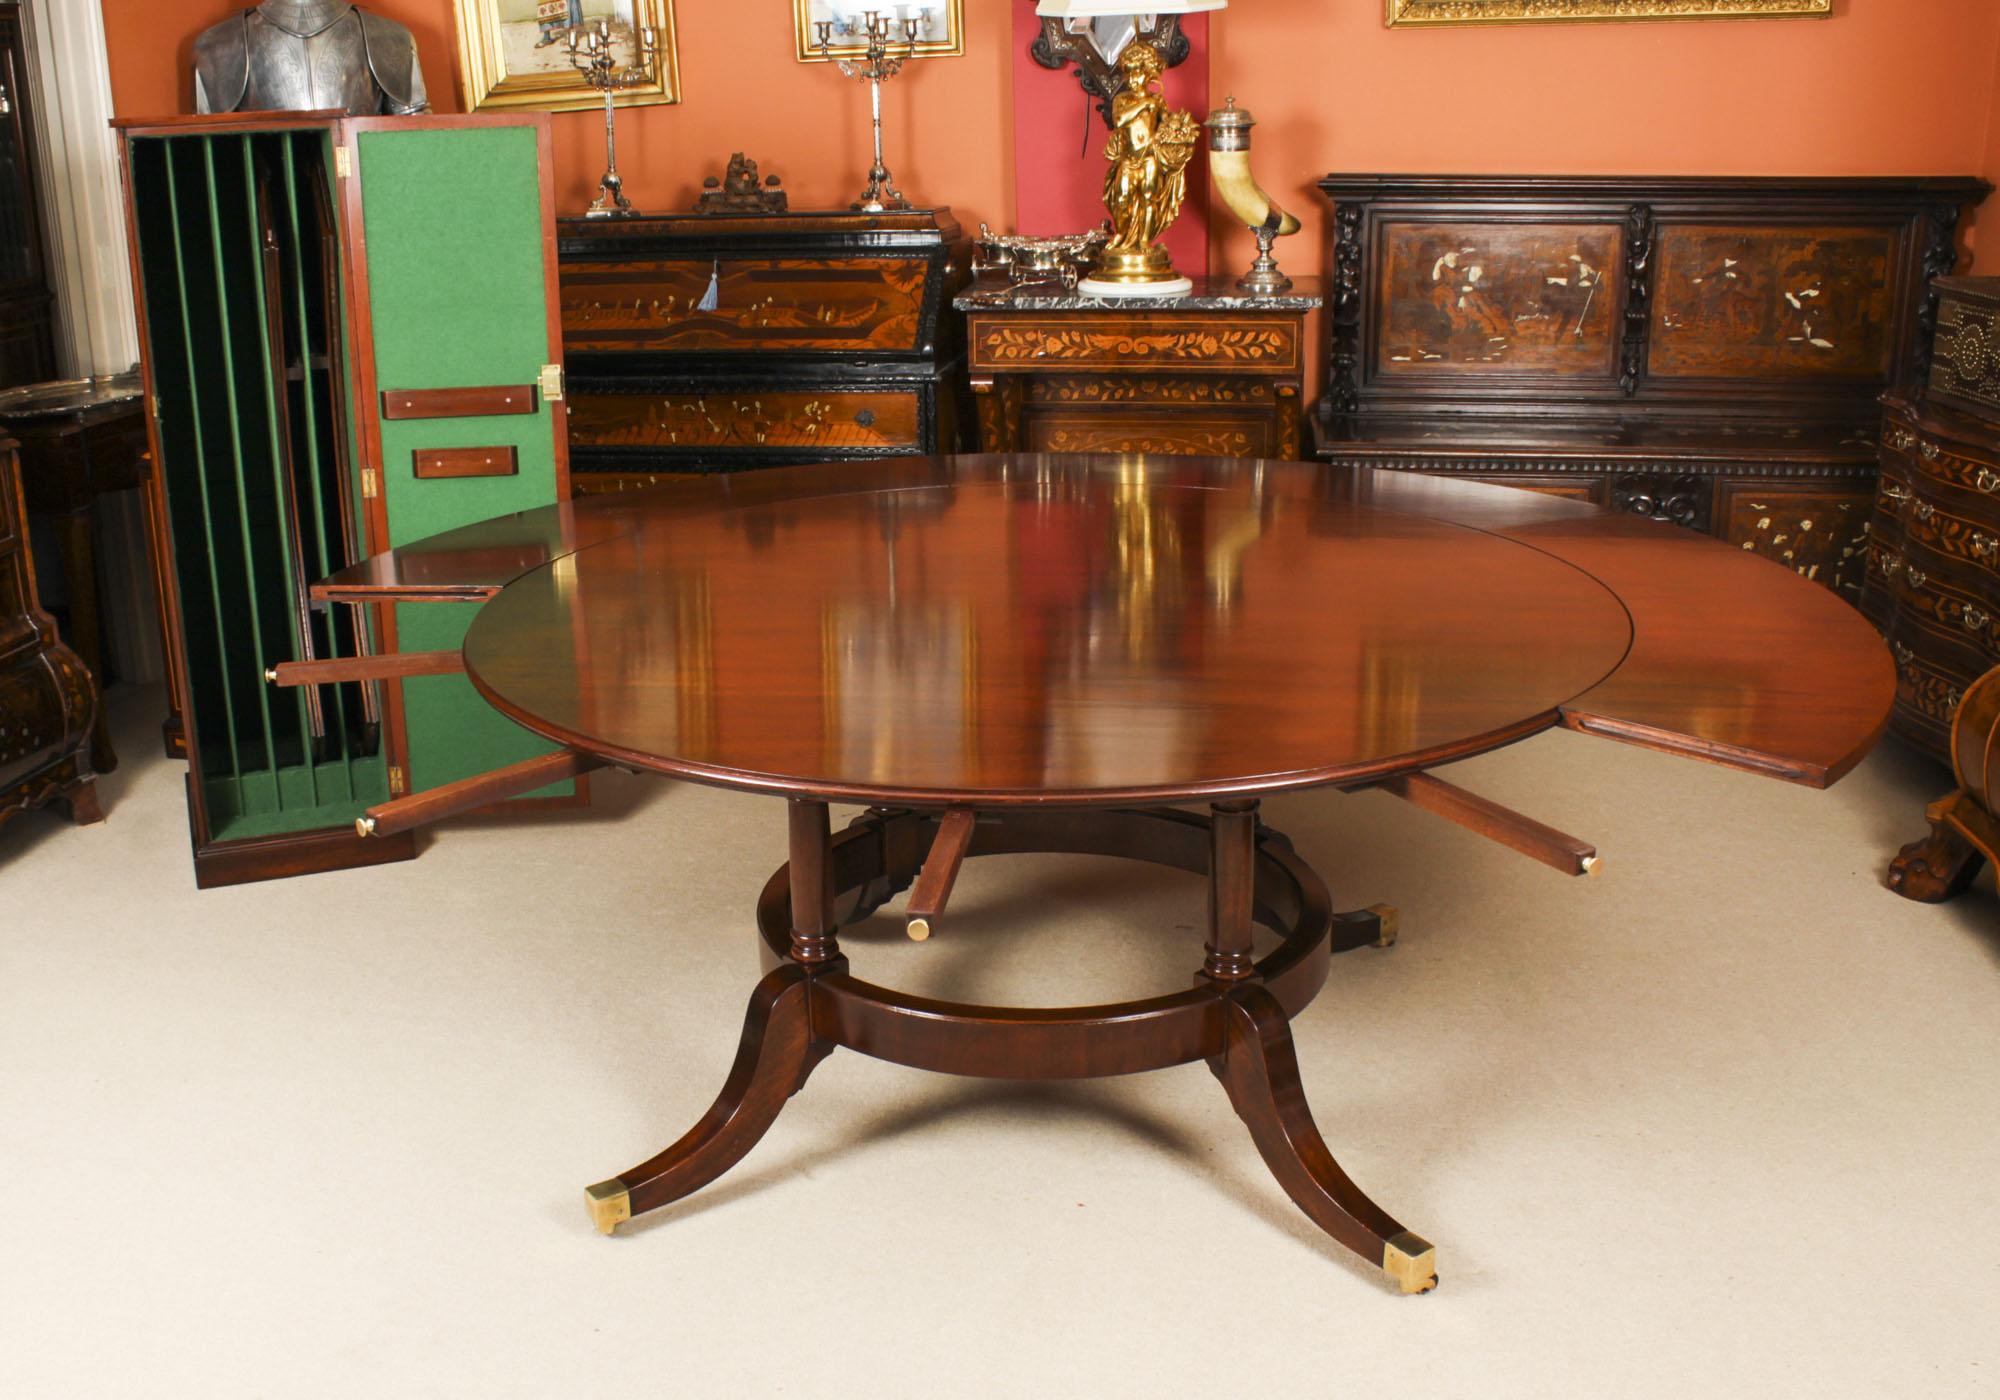 Regency Revival Vintage Jupe Dining Table, Leaf Cabinet & 10 Chairs Mid 20th C